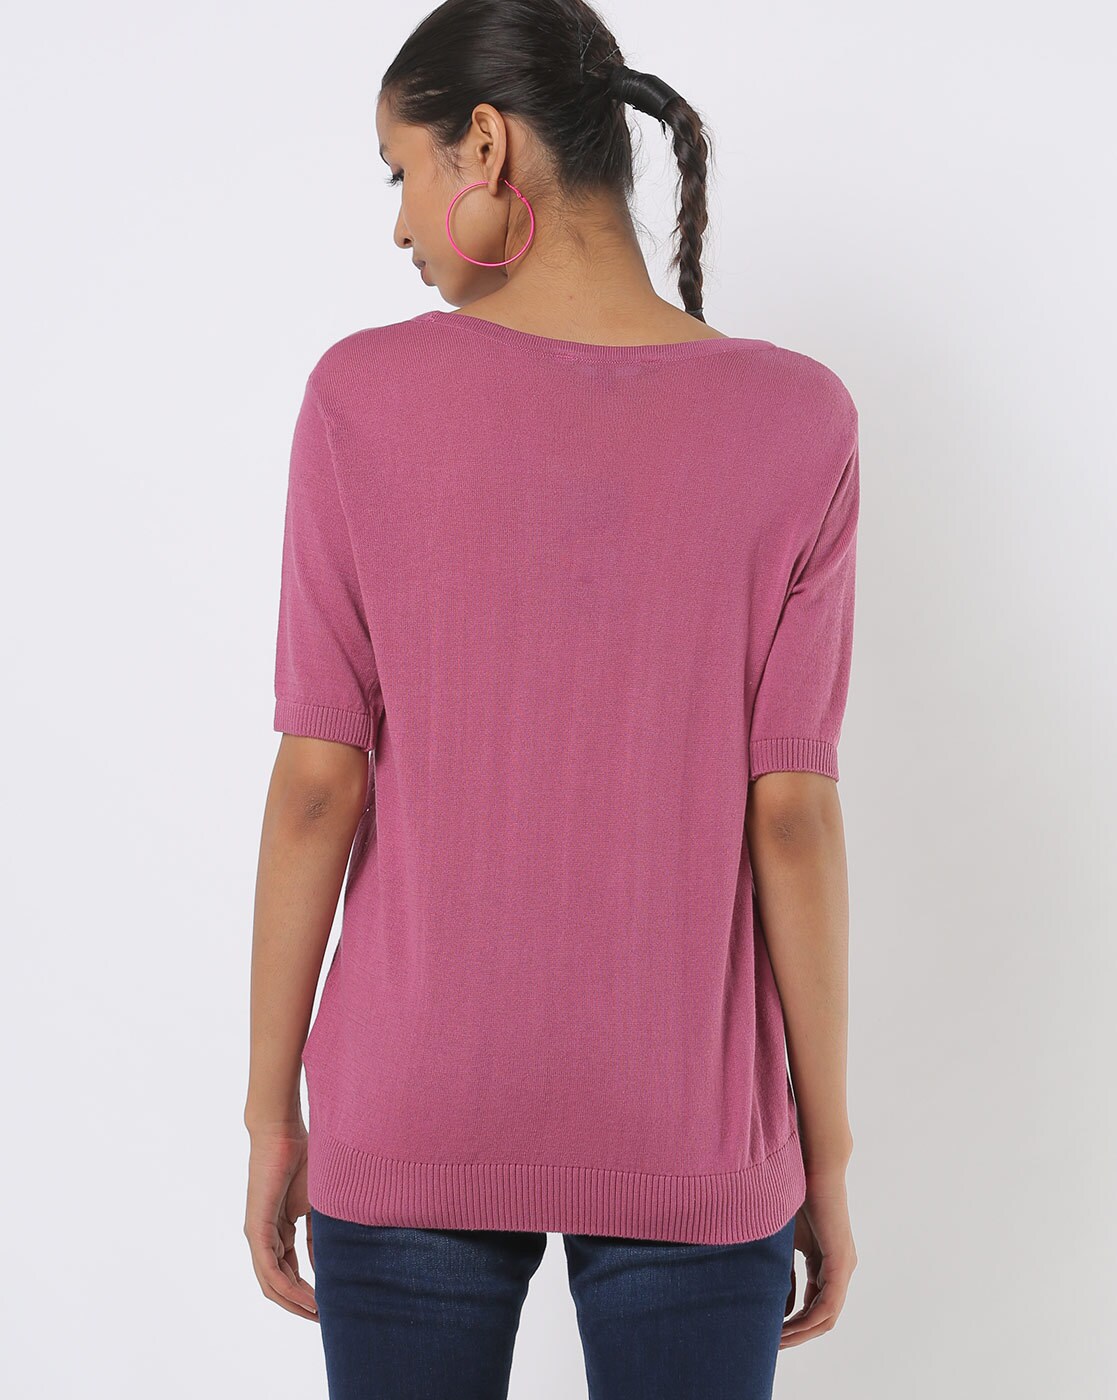 Buy Purple Sweaters & Cardigans for Women by Fig Online